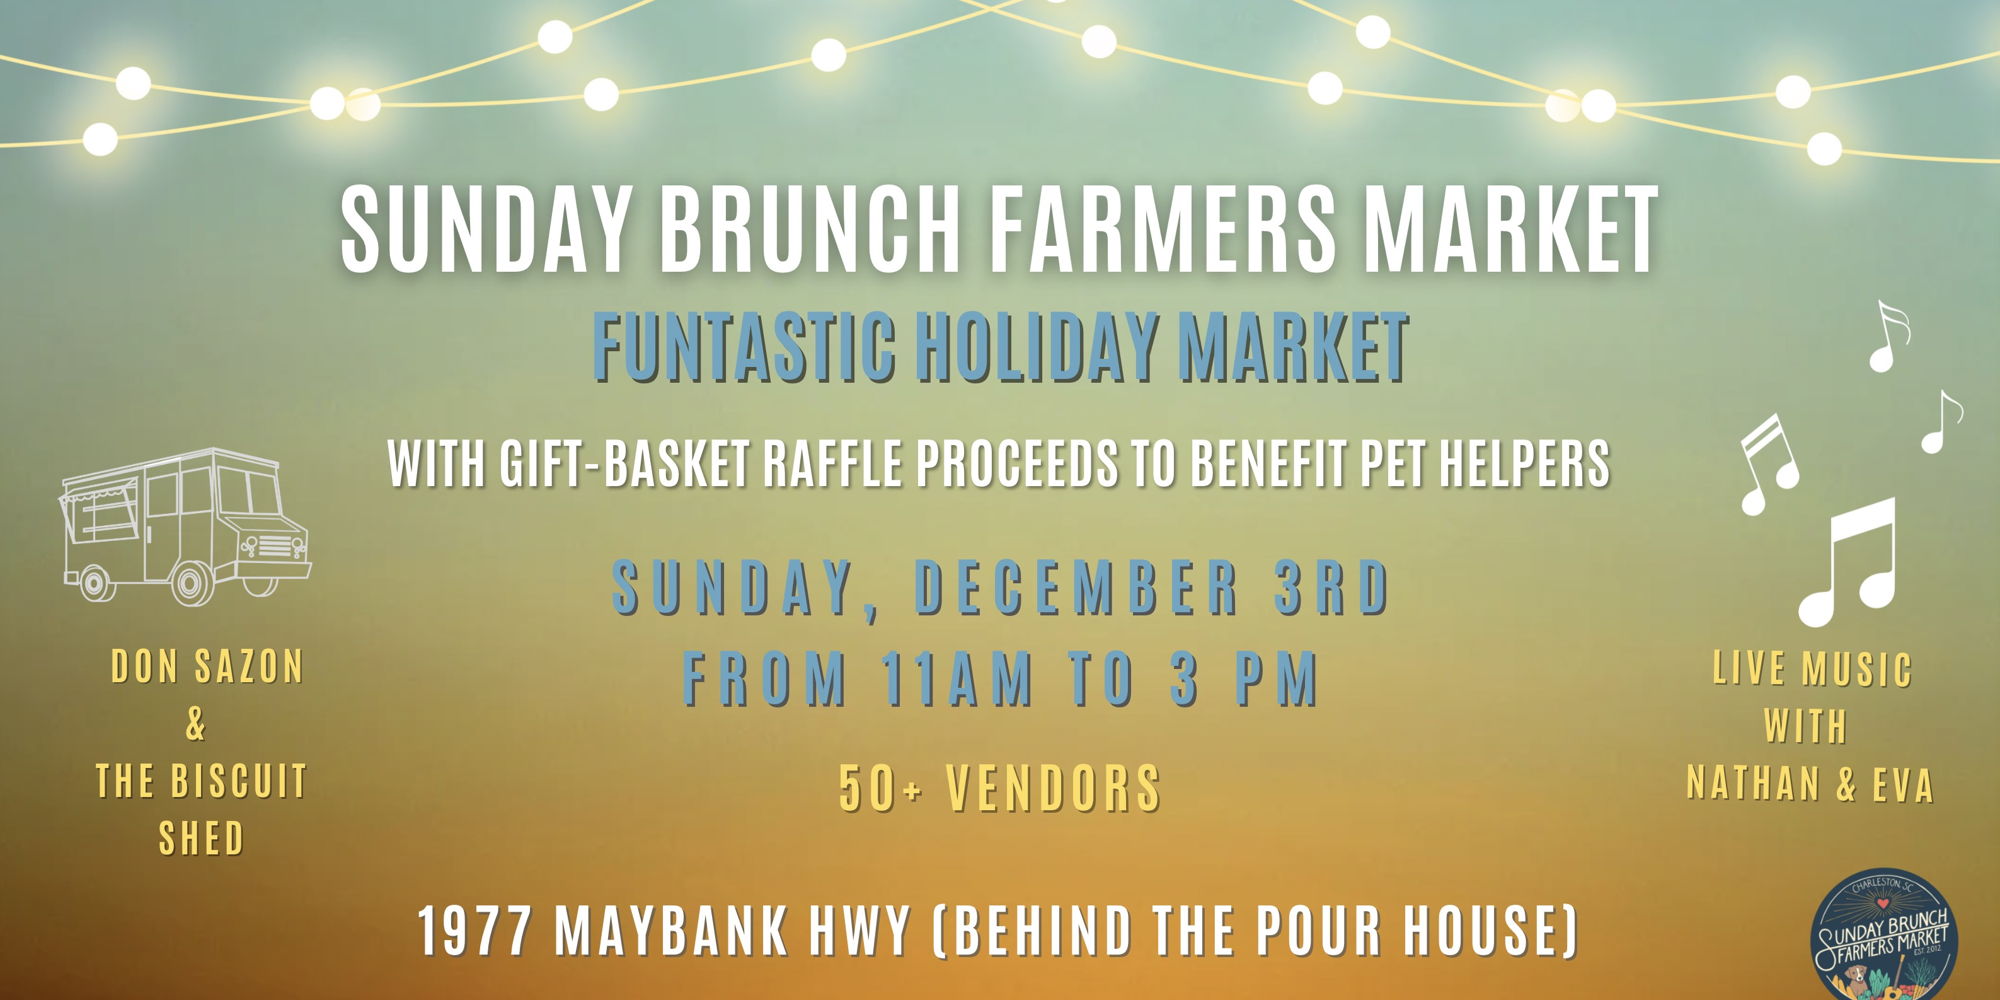 The Sunday Brunch Farmers Market Funtastic Holiday Market promotional image